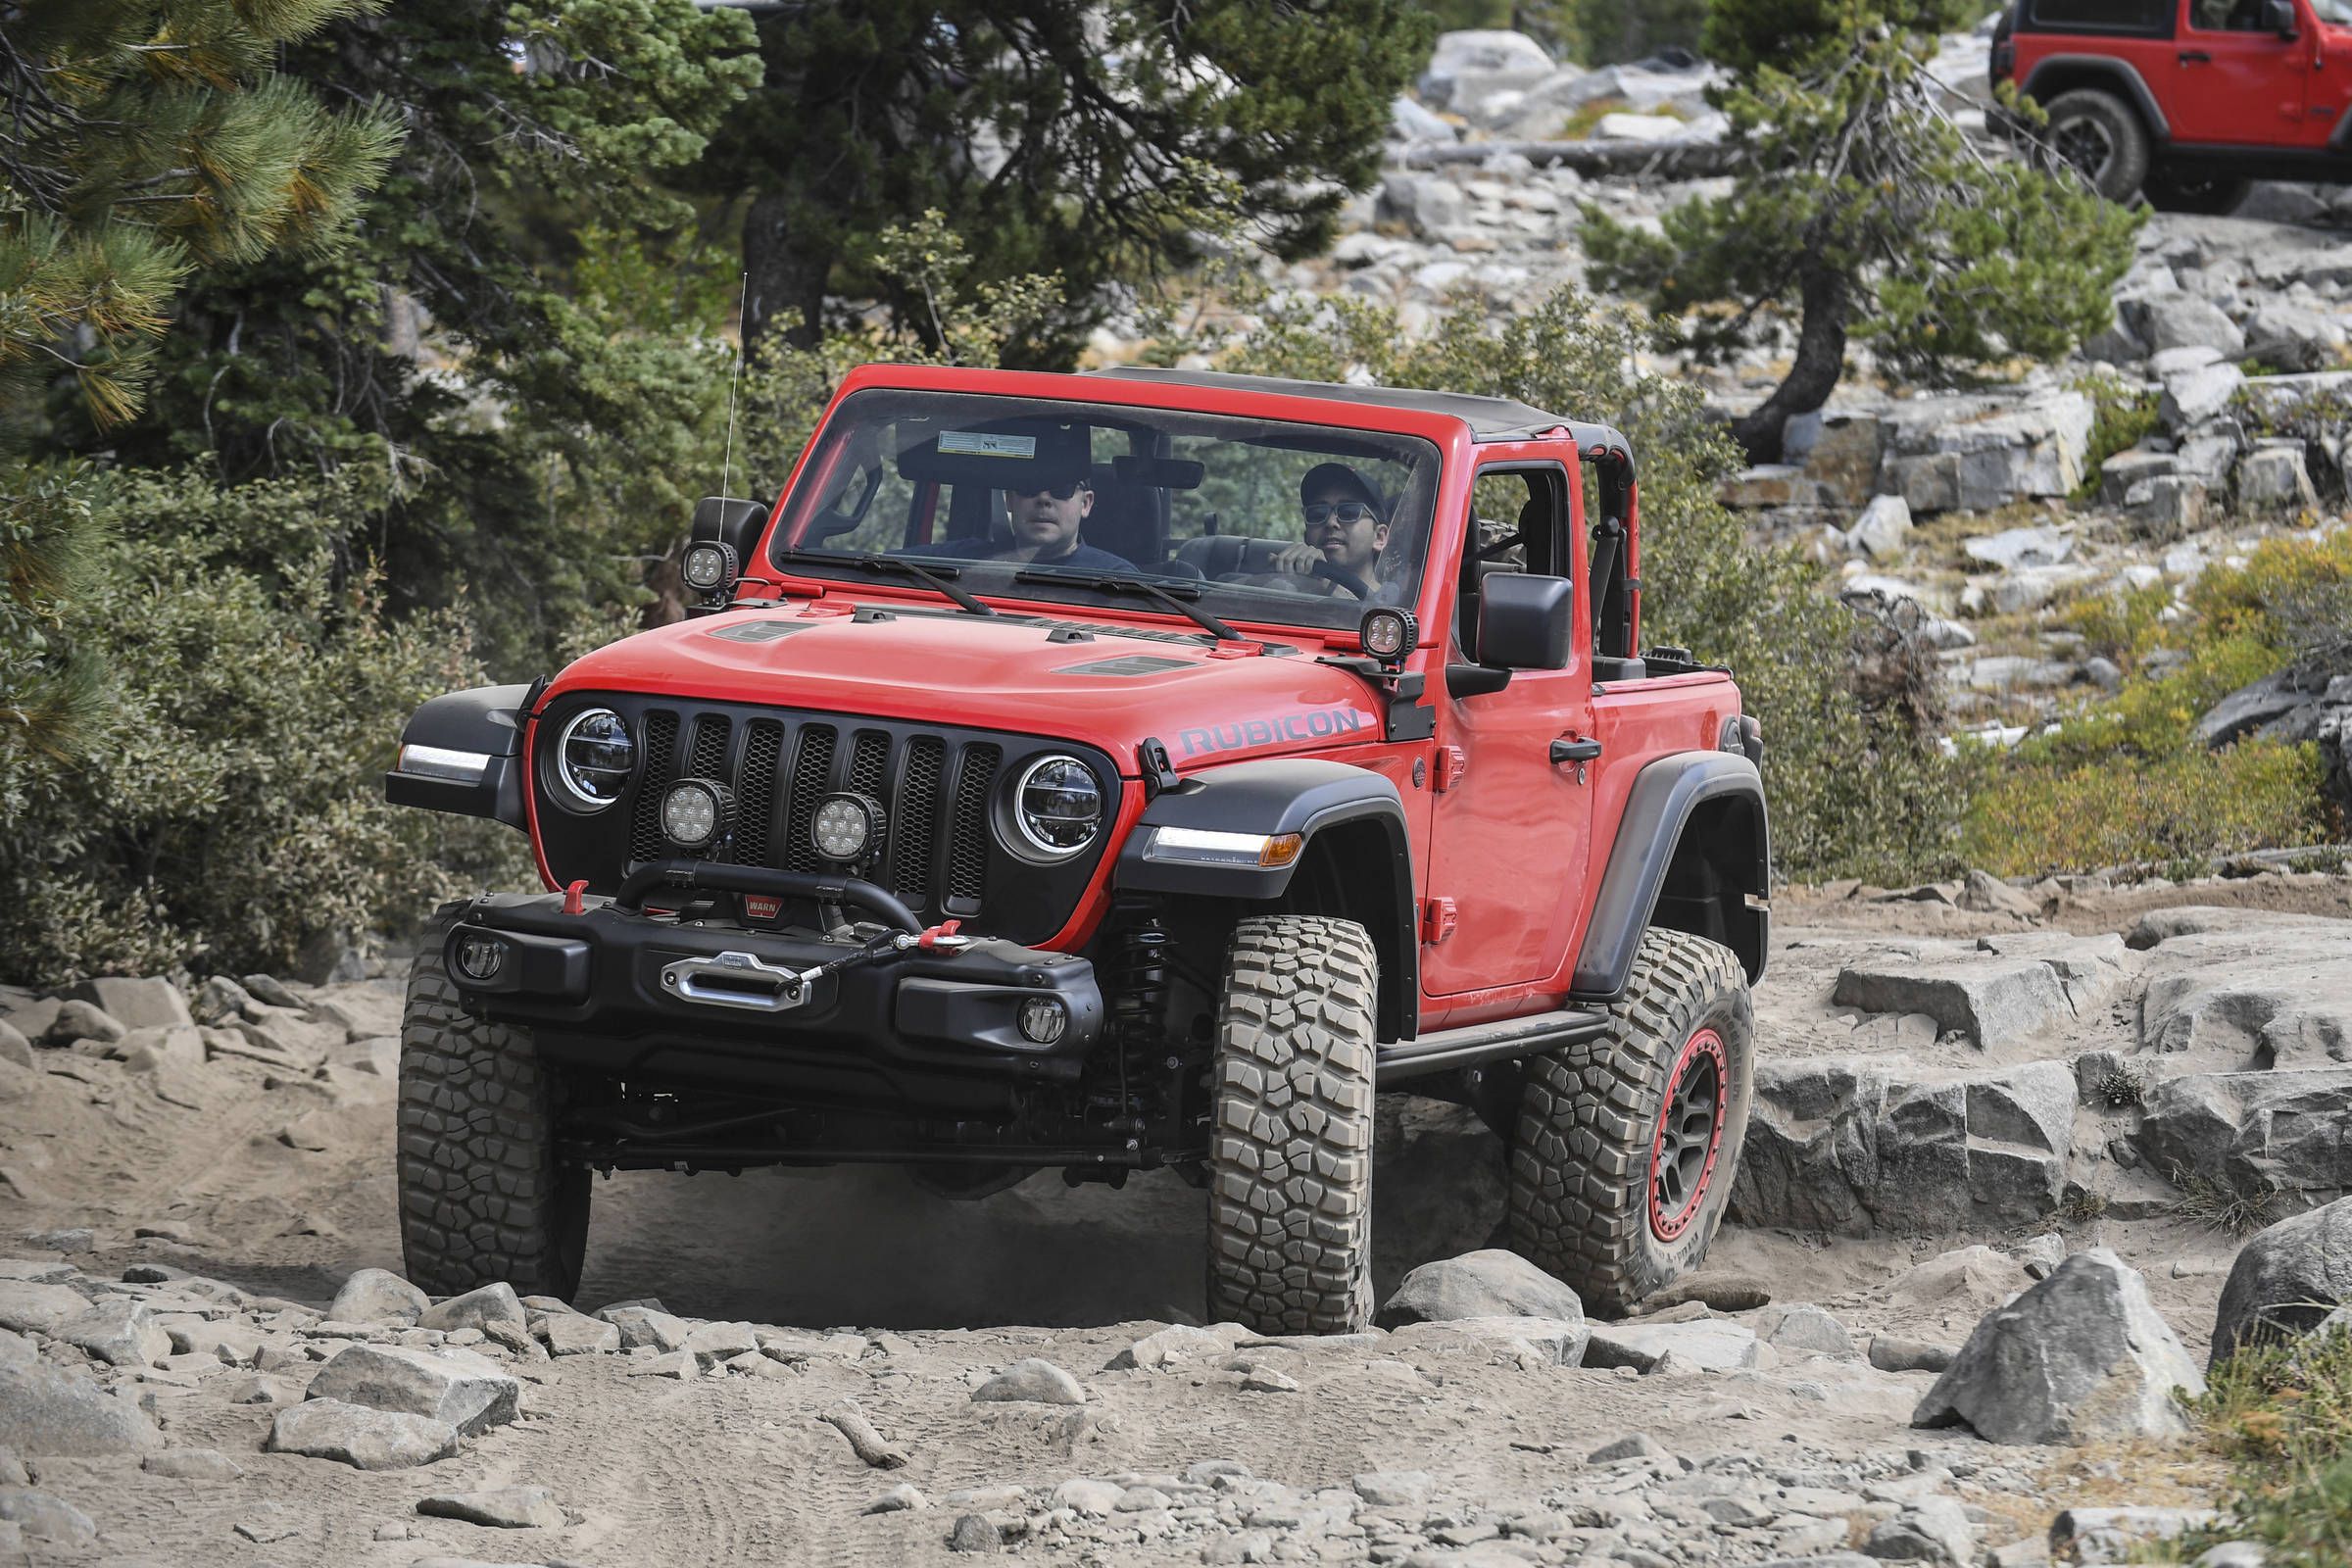 Sitting Wranglers: There's no shortage of 2018 Jeep Wranglers